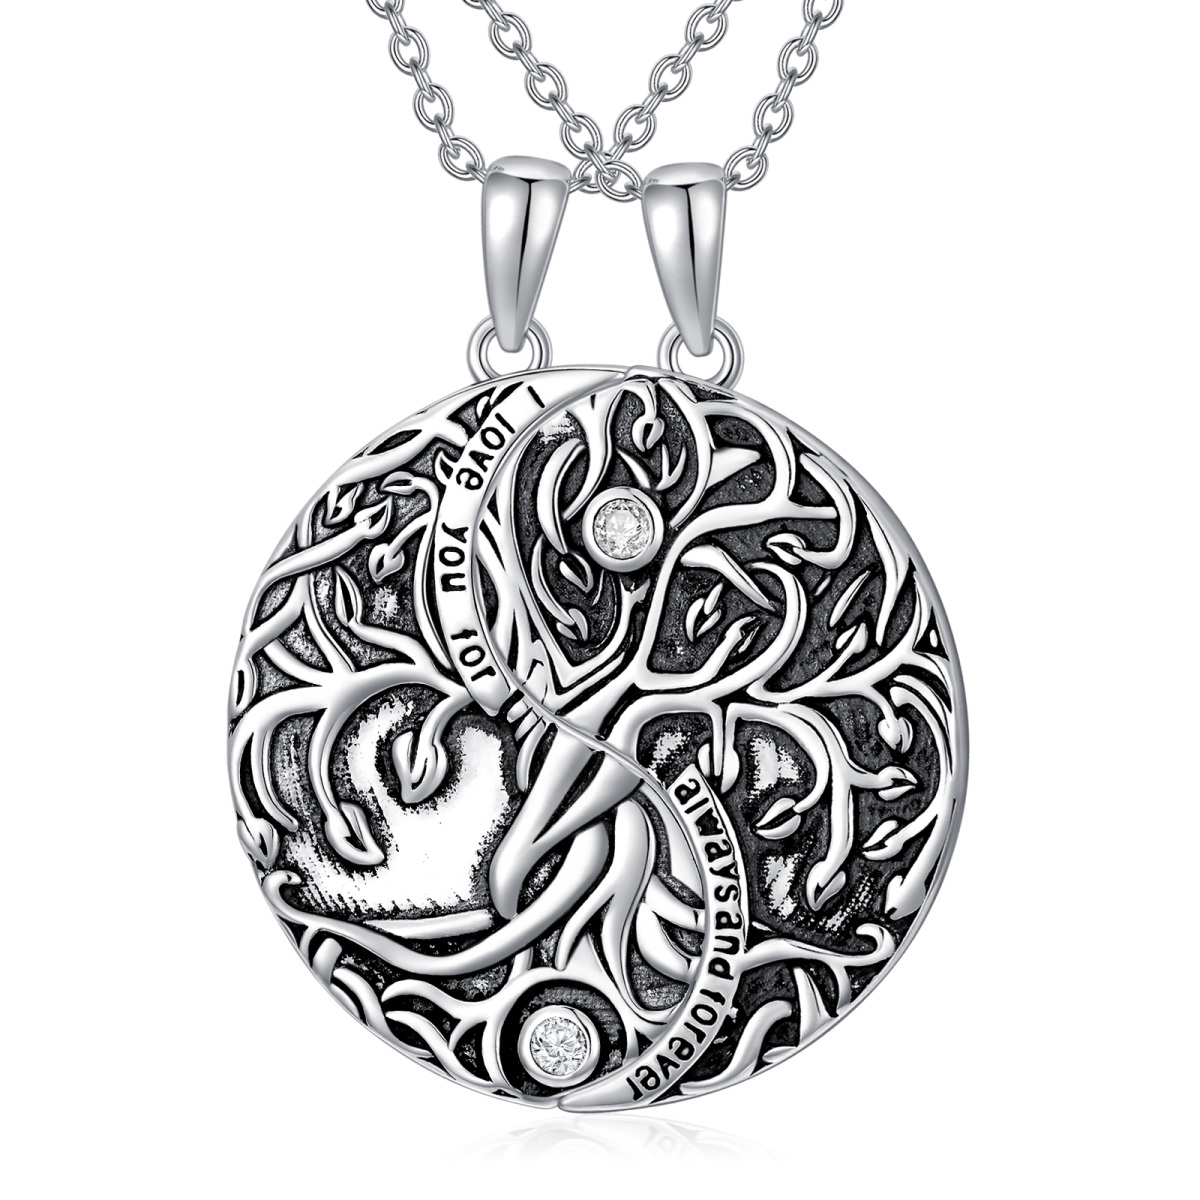 Sterling Silver Circular Shaped Crystal Tree Of Life & Yin Yang Pendant Necklace with Engraved Word-1